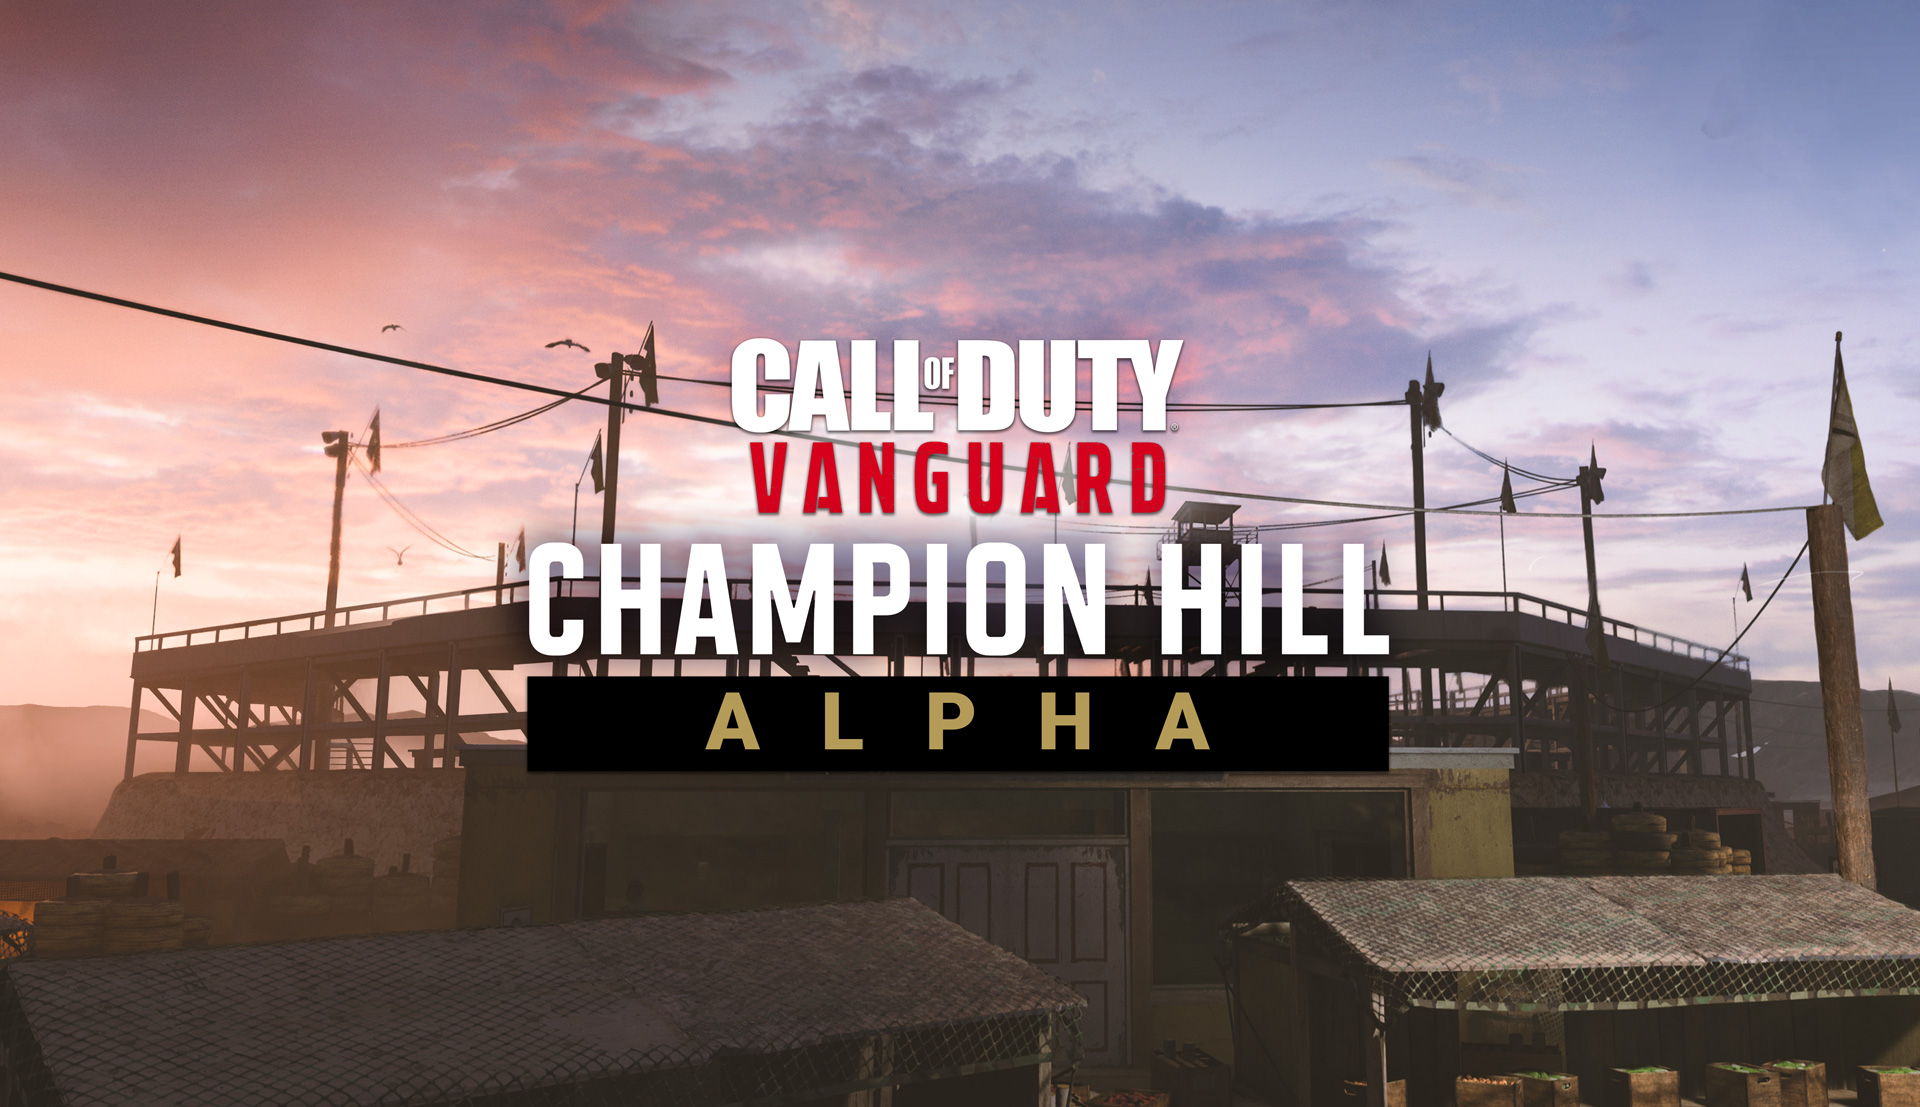 Play the Call of Duty®: Vanguard PlayStation® Alpha — Featuring the New Champion Hill Multiplayer Mode — on August 27–29